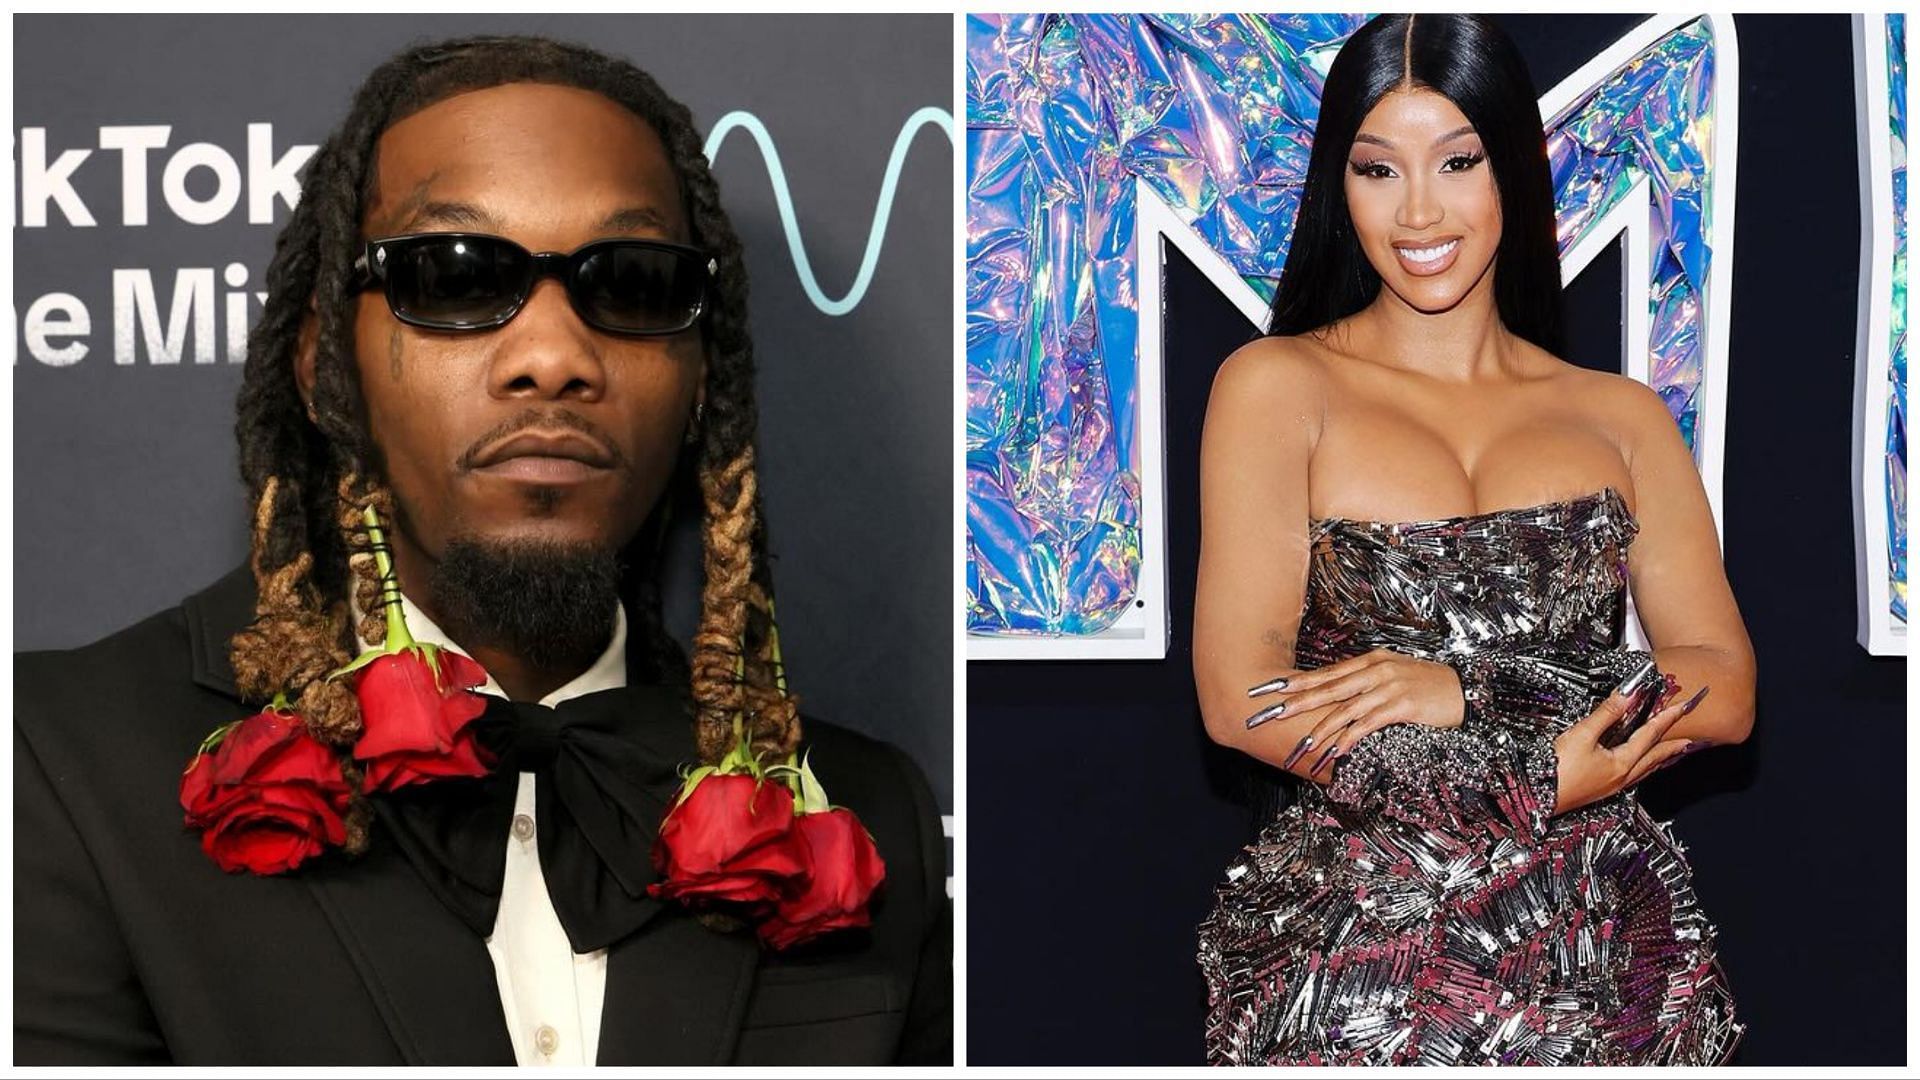 The Need It singer has been alleged of cheating on Cardi B (Image via Facebook / Offset / Cardi B)